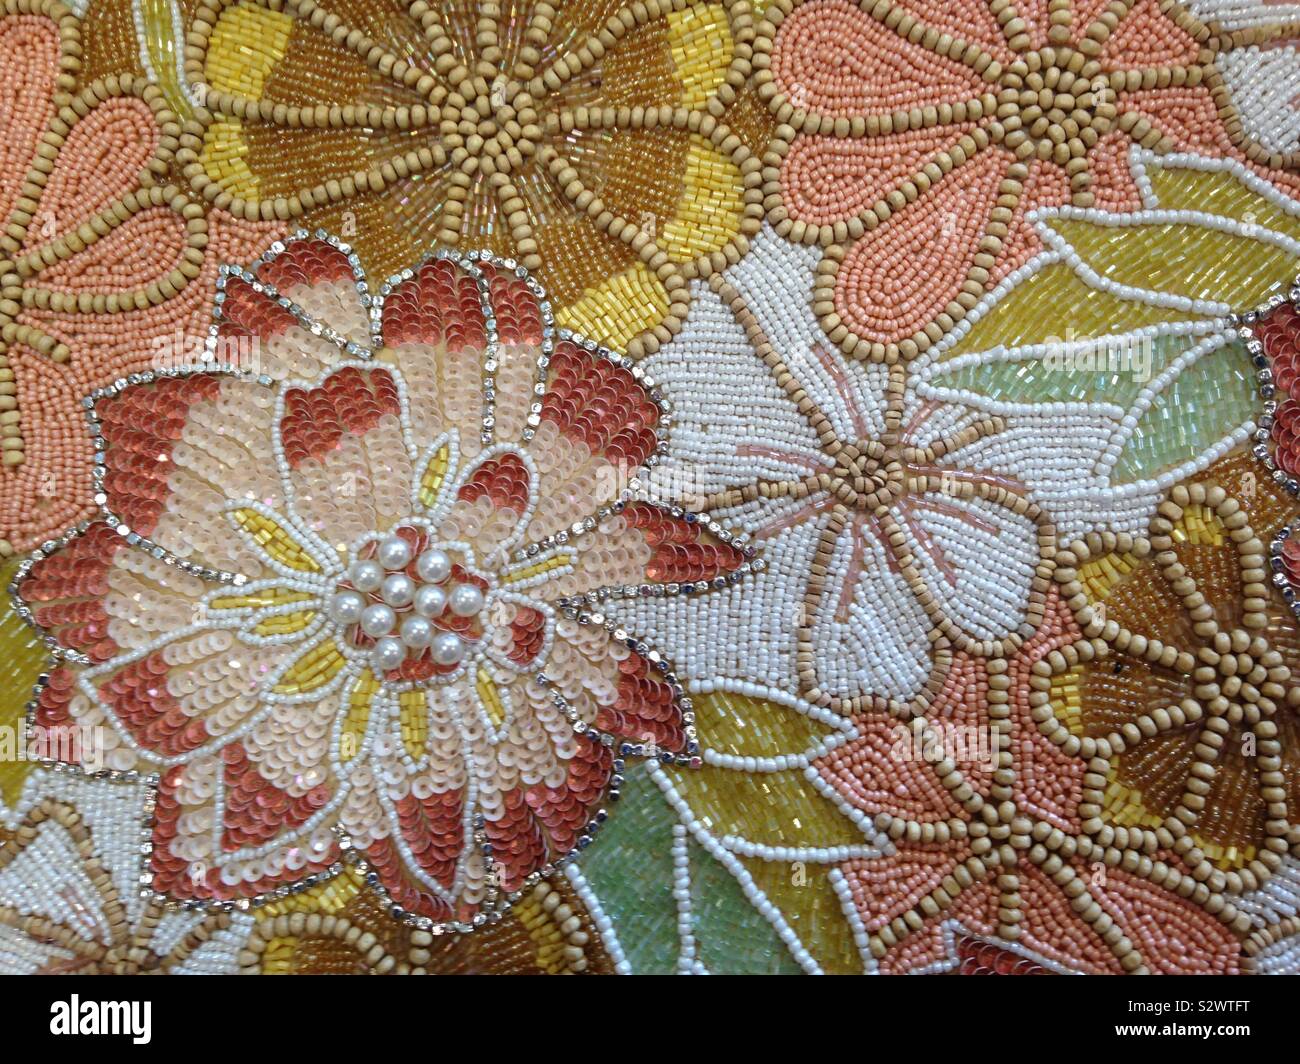 Beaded floral motif using earth-tone colors. Stock Photo